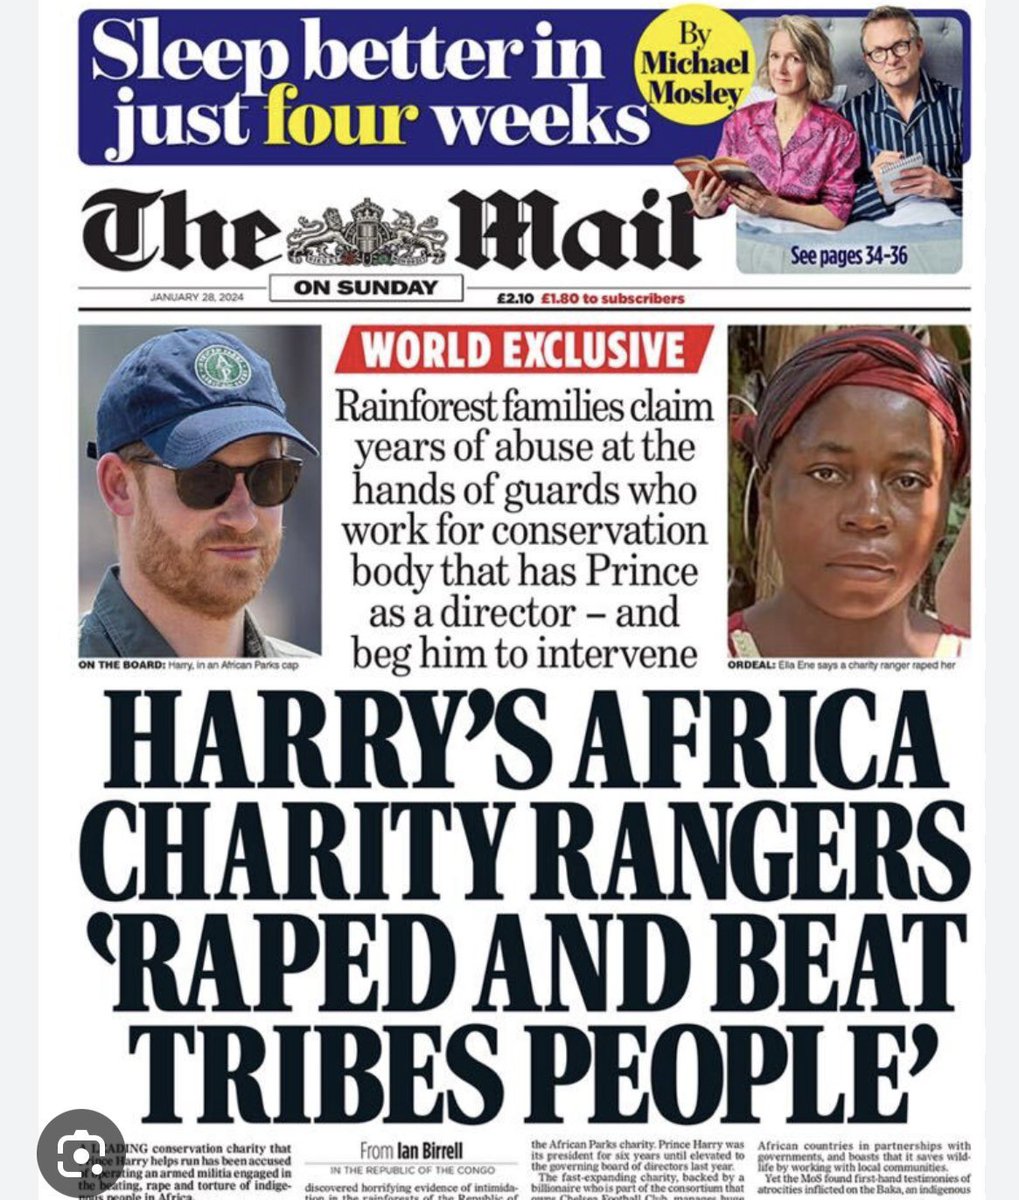 Happy #Harry enjoying his freedom 🤣 And please don’t forget #AfricanParks share the article with all your posts. He can’t whitewash this. #MeghanandHarrygriftVeterans #HarryandMeghanRuinedInvictus #PrinceHarryIsACoward #HarryIsACoward #MeghanandHarryAreAJoke